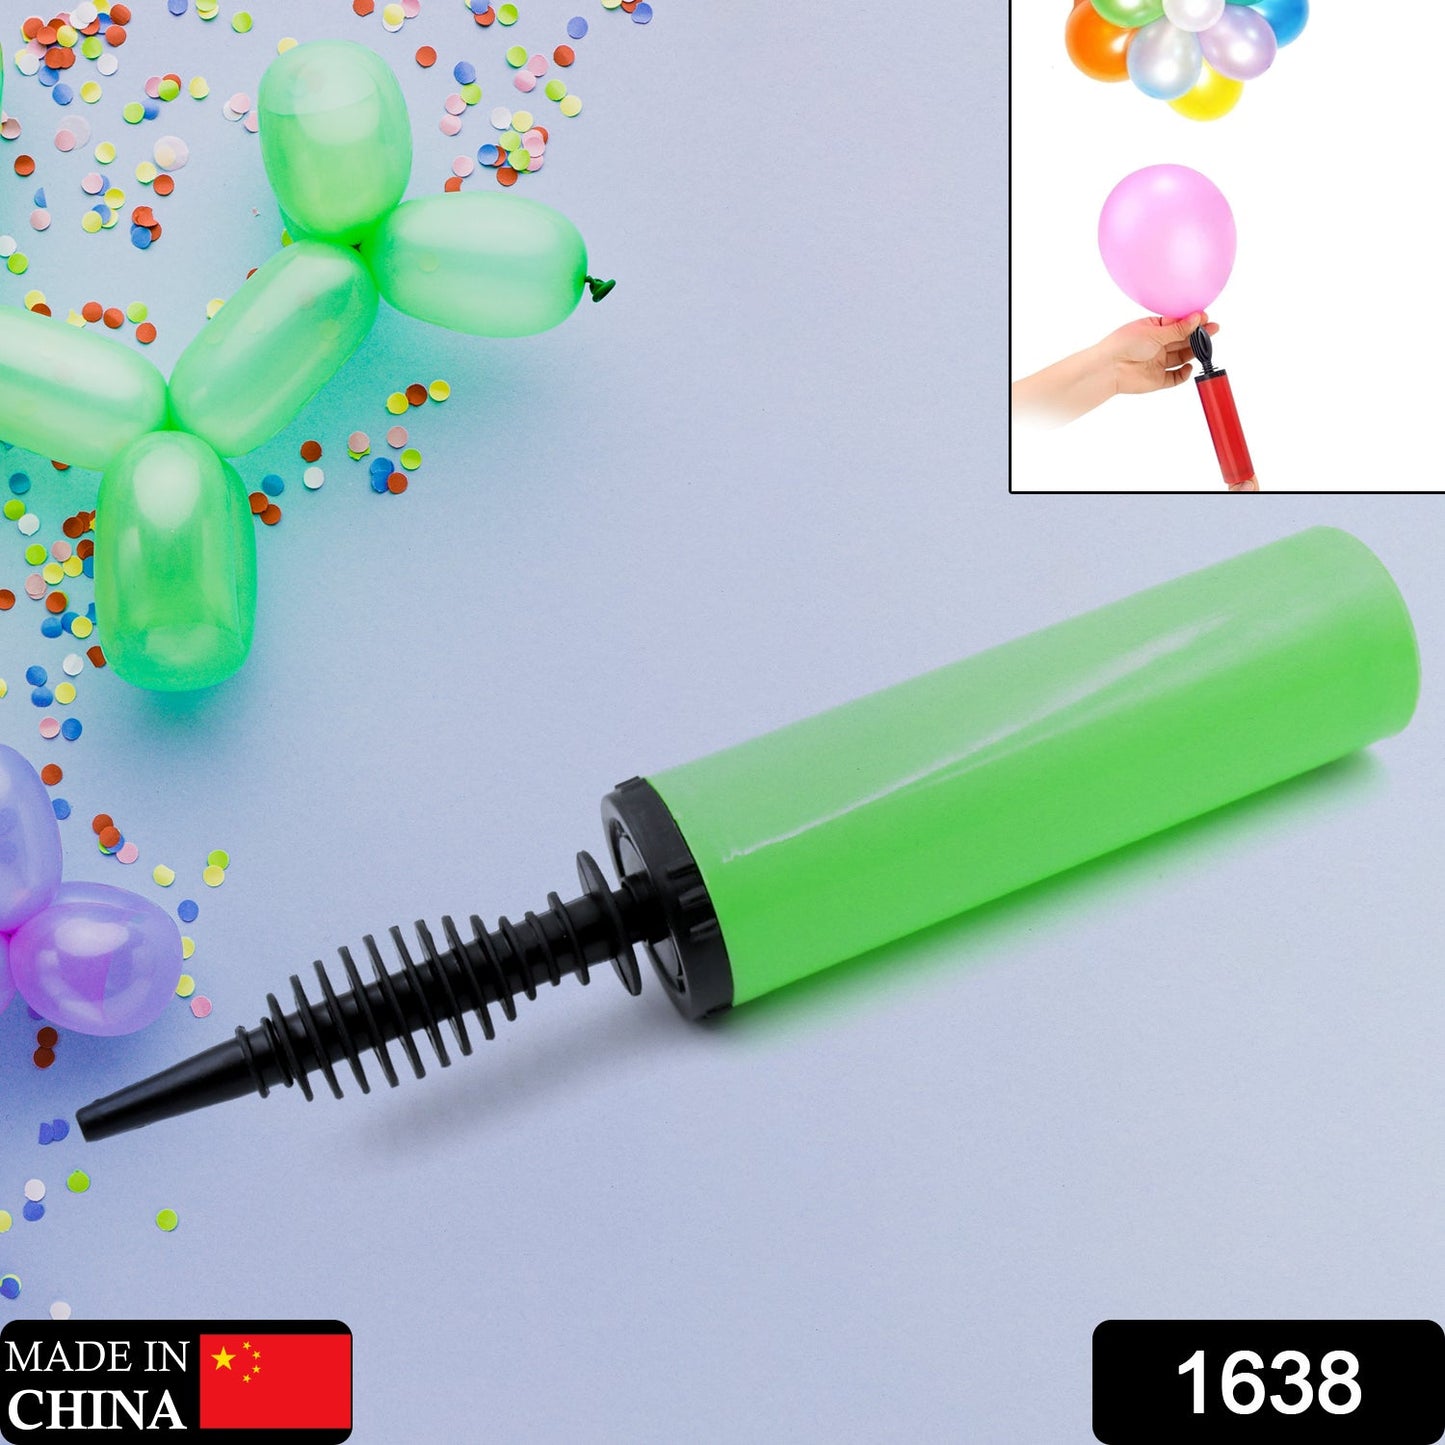 1638 Handy Air Balloon Pumps for Foil Balloons and Inflatable Toys